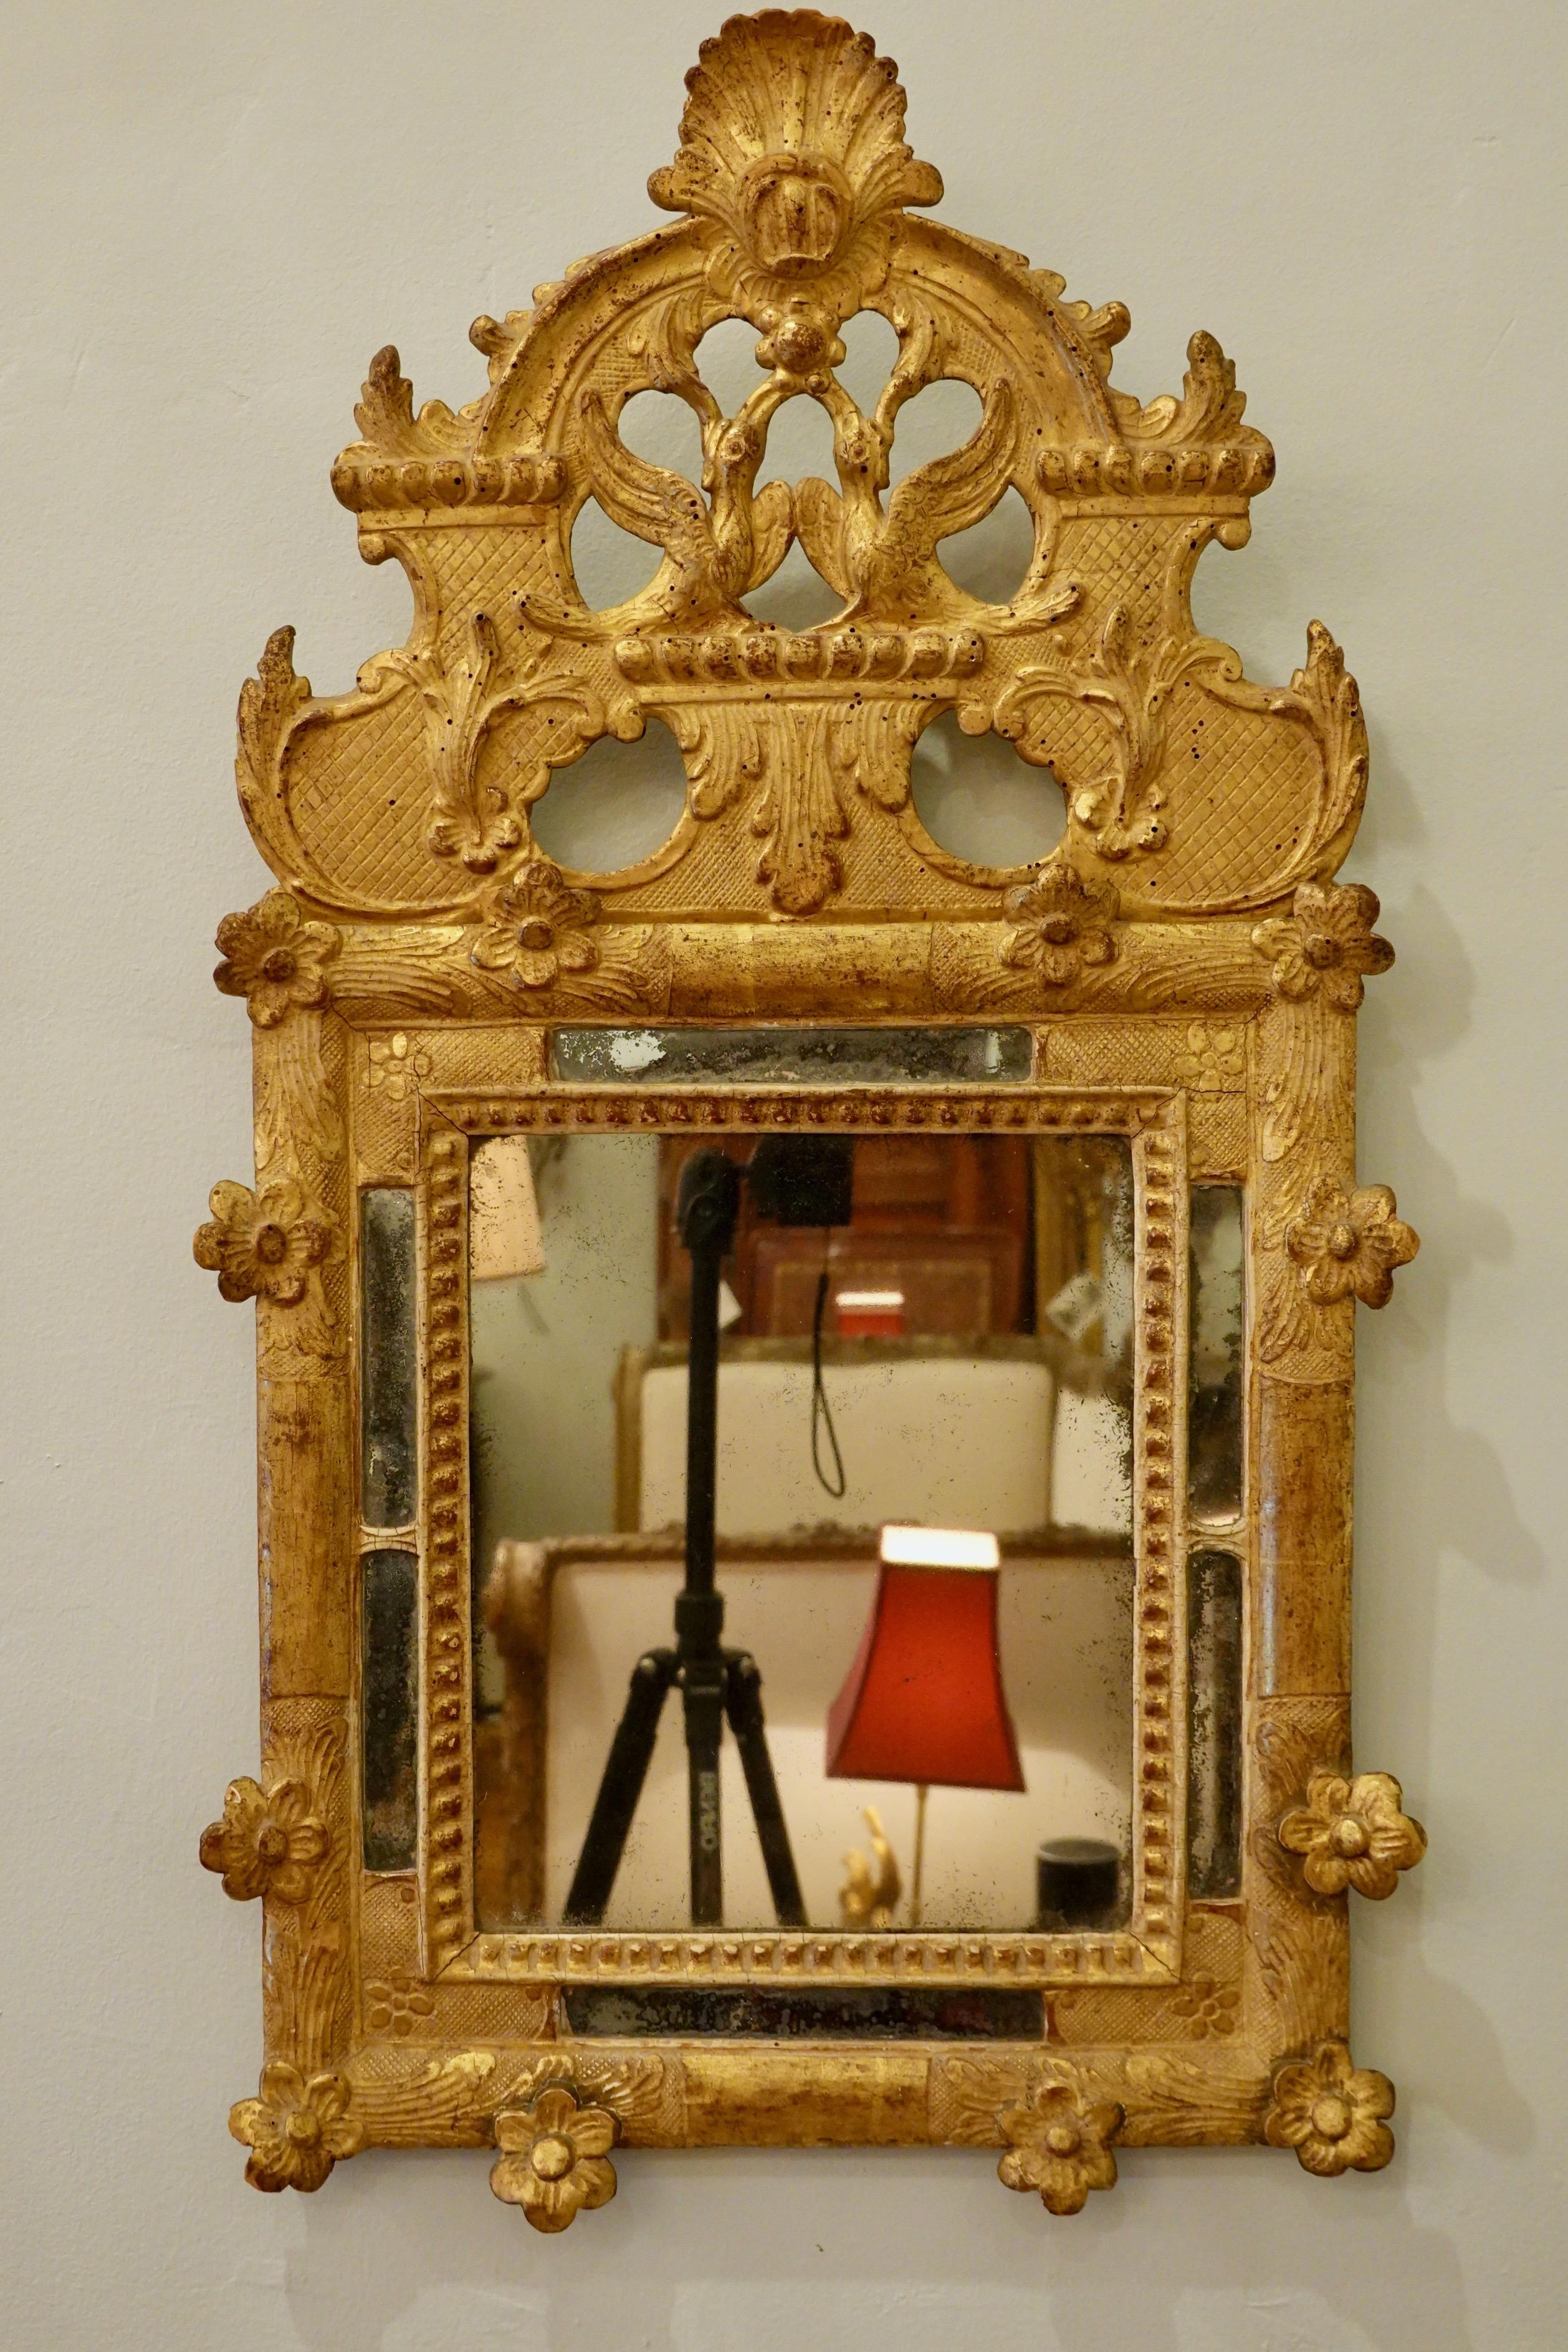 French Regence period giltwood parclose mirror (18th century), with beautifully-detailed carved birds and scallop shell on pediment, and flowers and other decoration around the frame. Very nice example of mercury glass, which appears original. The